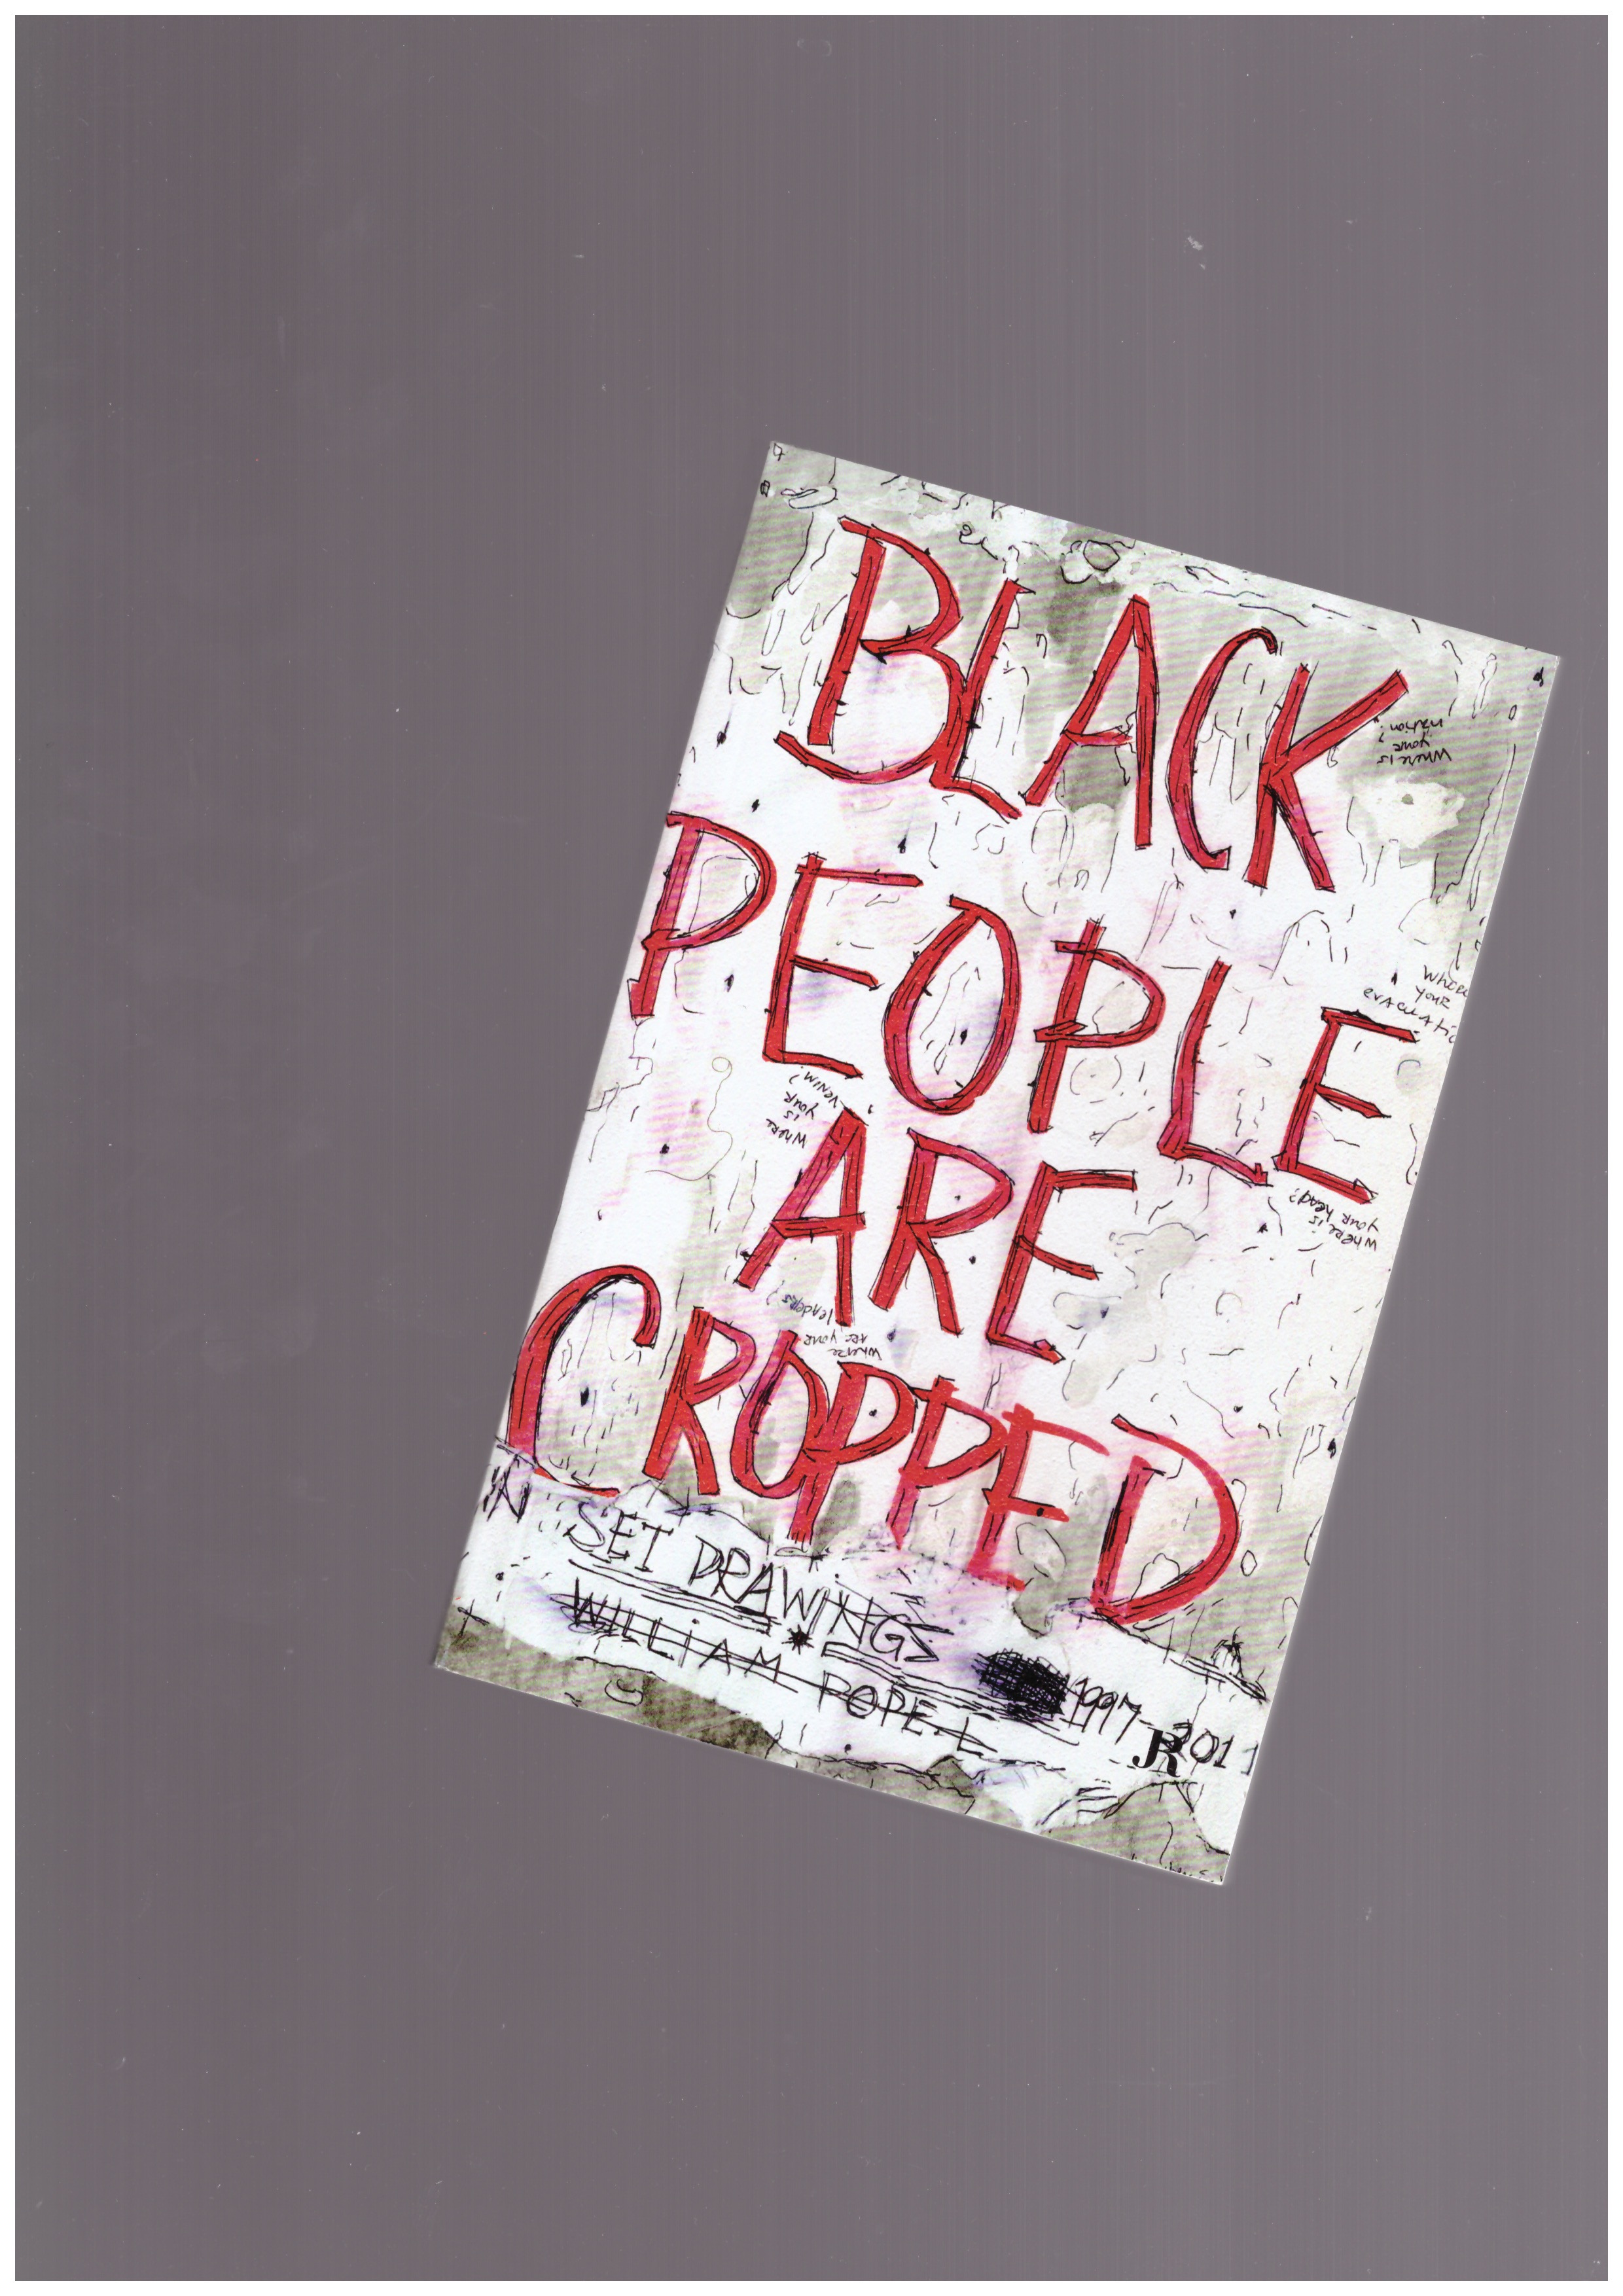 POPE L., William - Black People Are Cropped – Skin Set Drawings 1997-2011